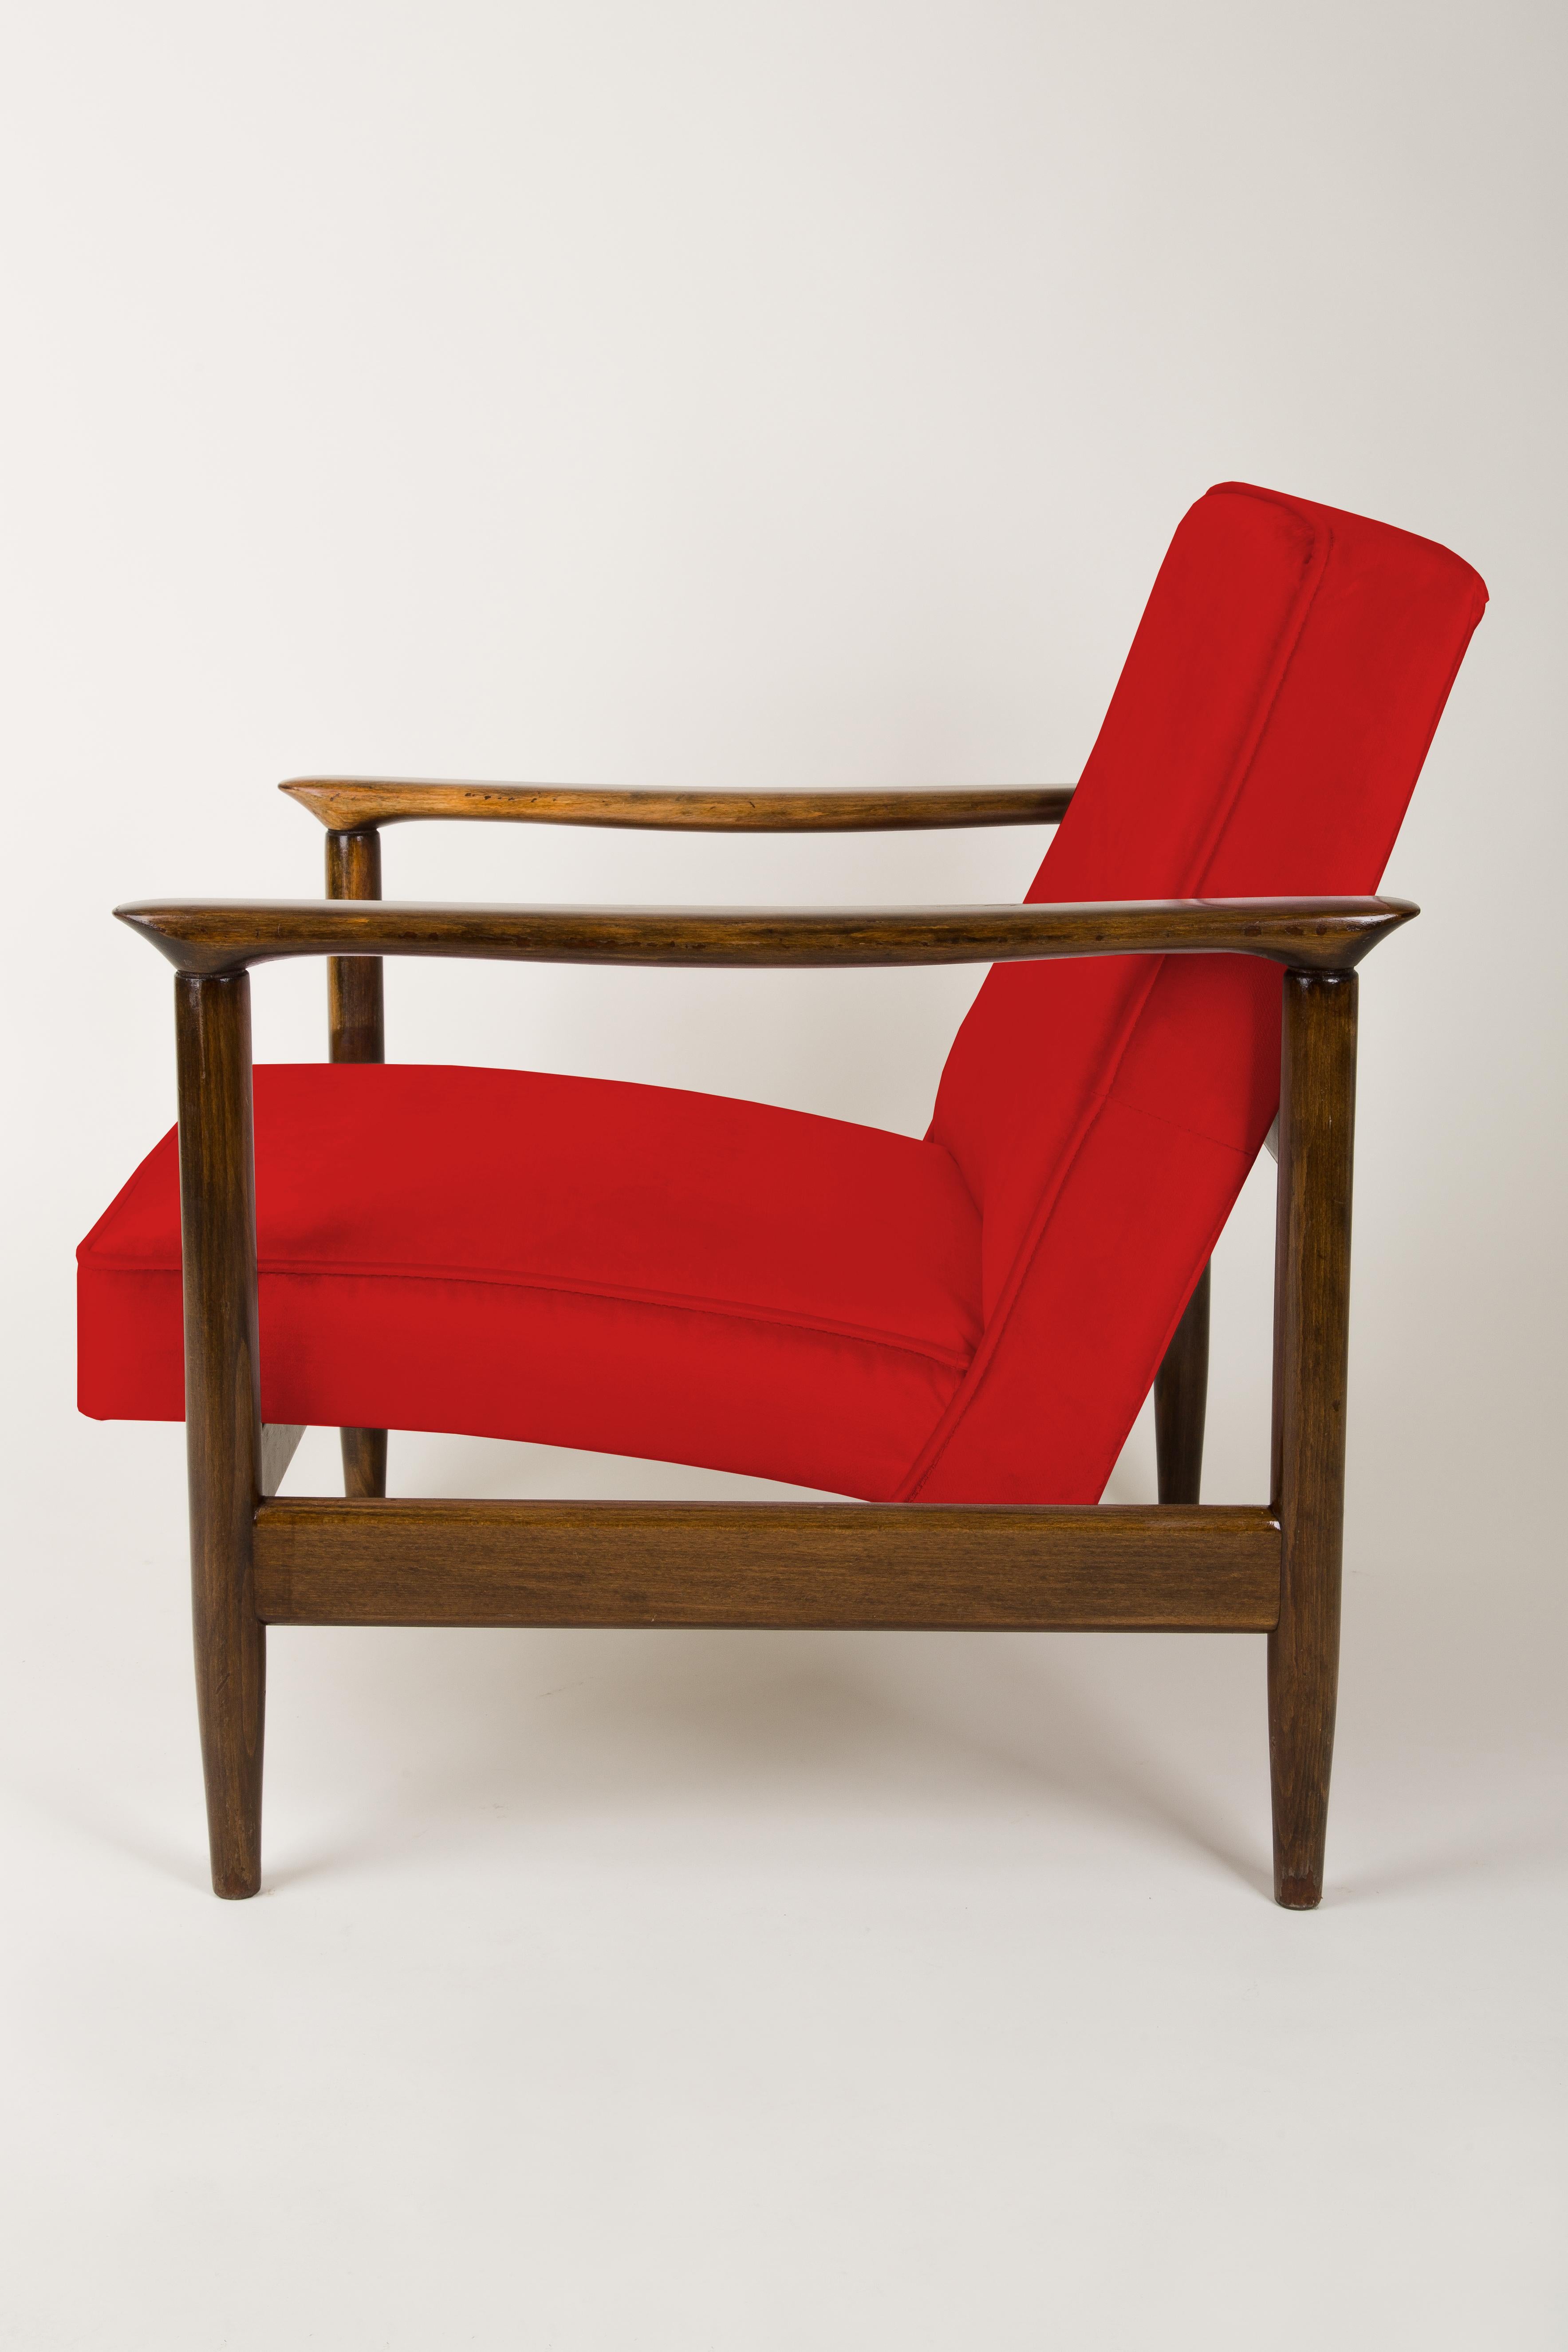 Hand-Crafted Red Armchair, Edmund Homa, GFM-142, 1960s, Poland For Sale